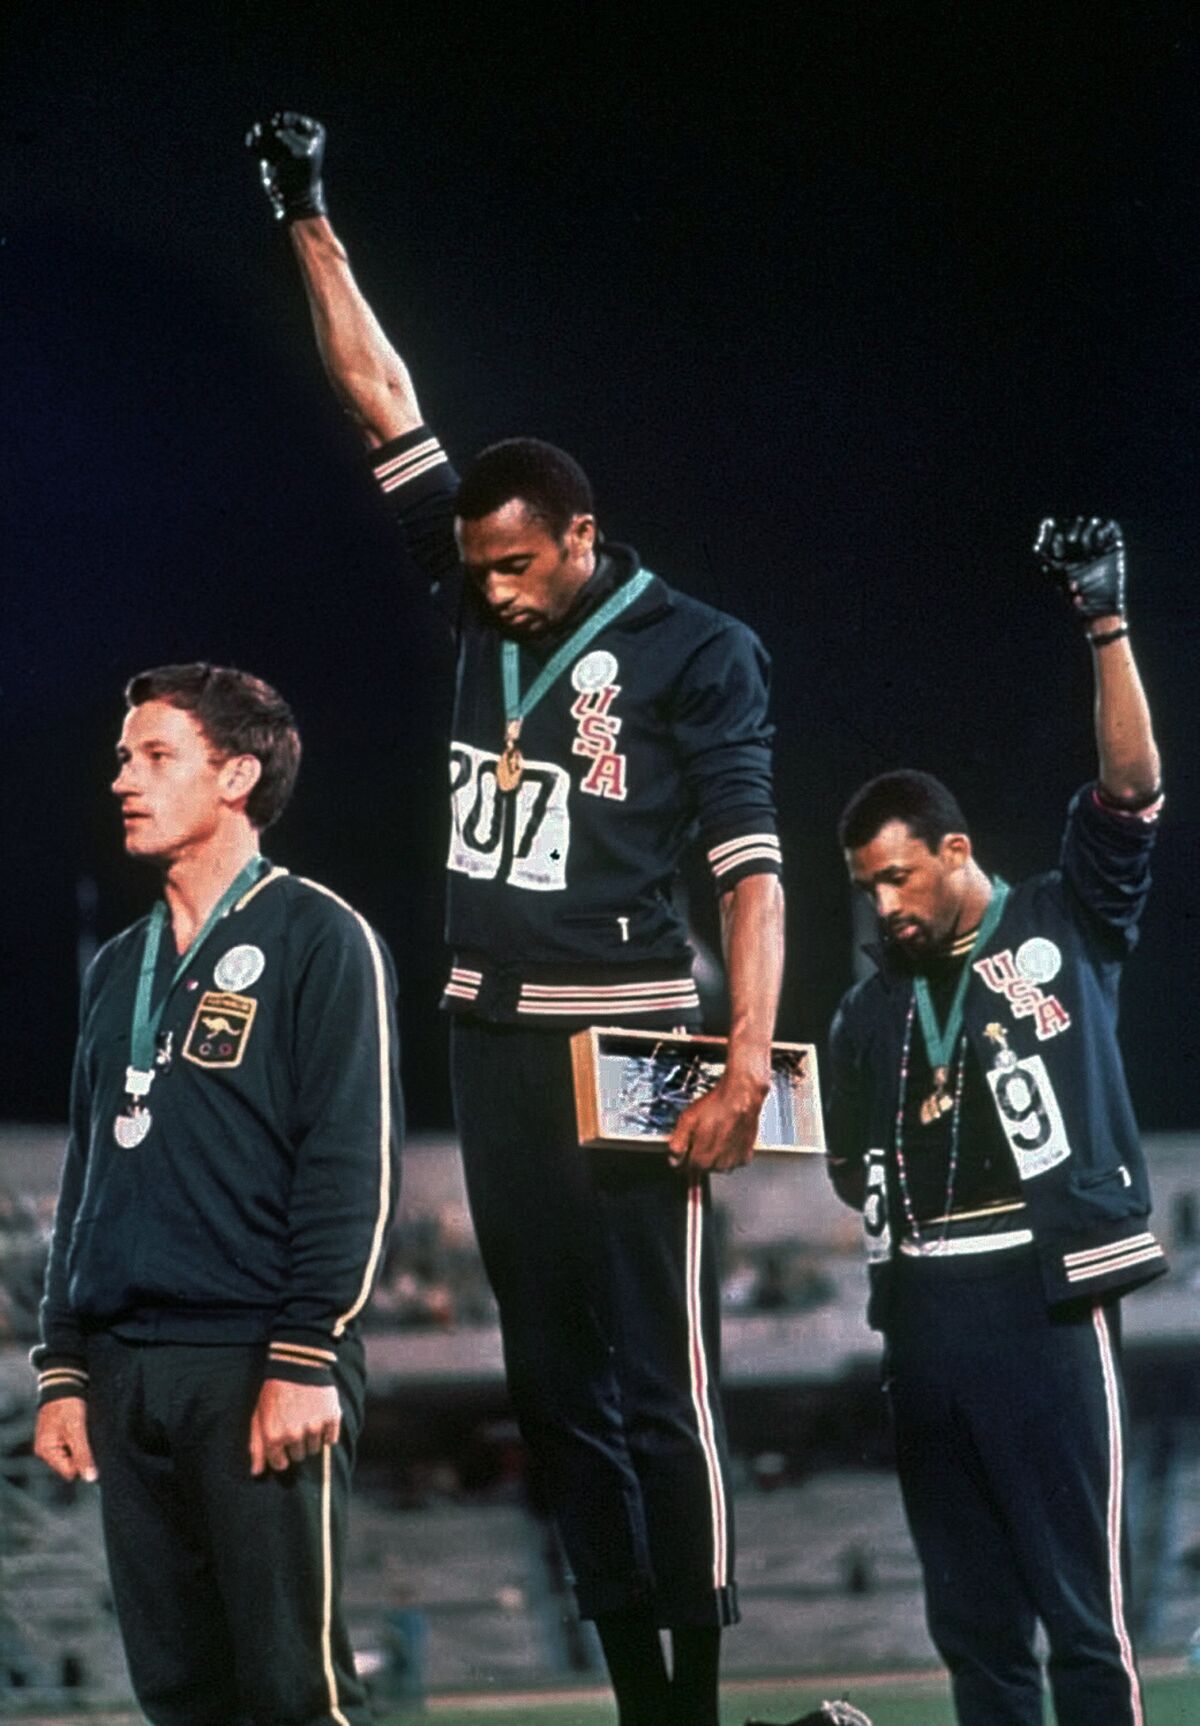 U.S. Olympic athletes Tommie Smith, center, and John Carlos make a black power salute in 1968 in Mexico City.